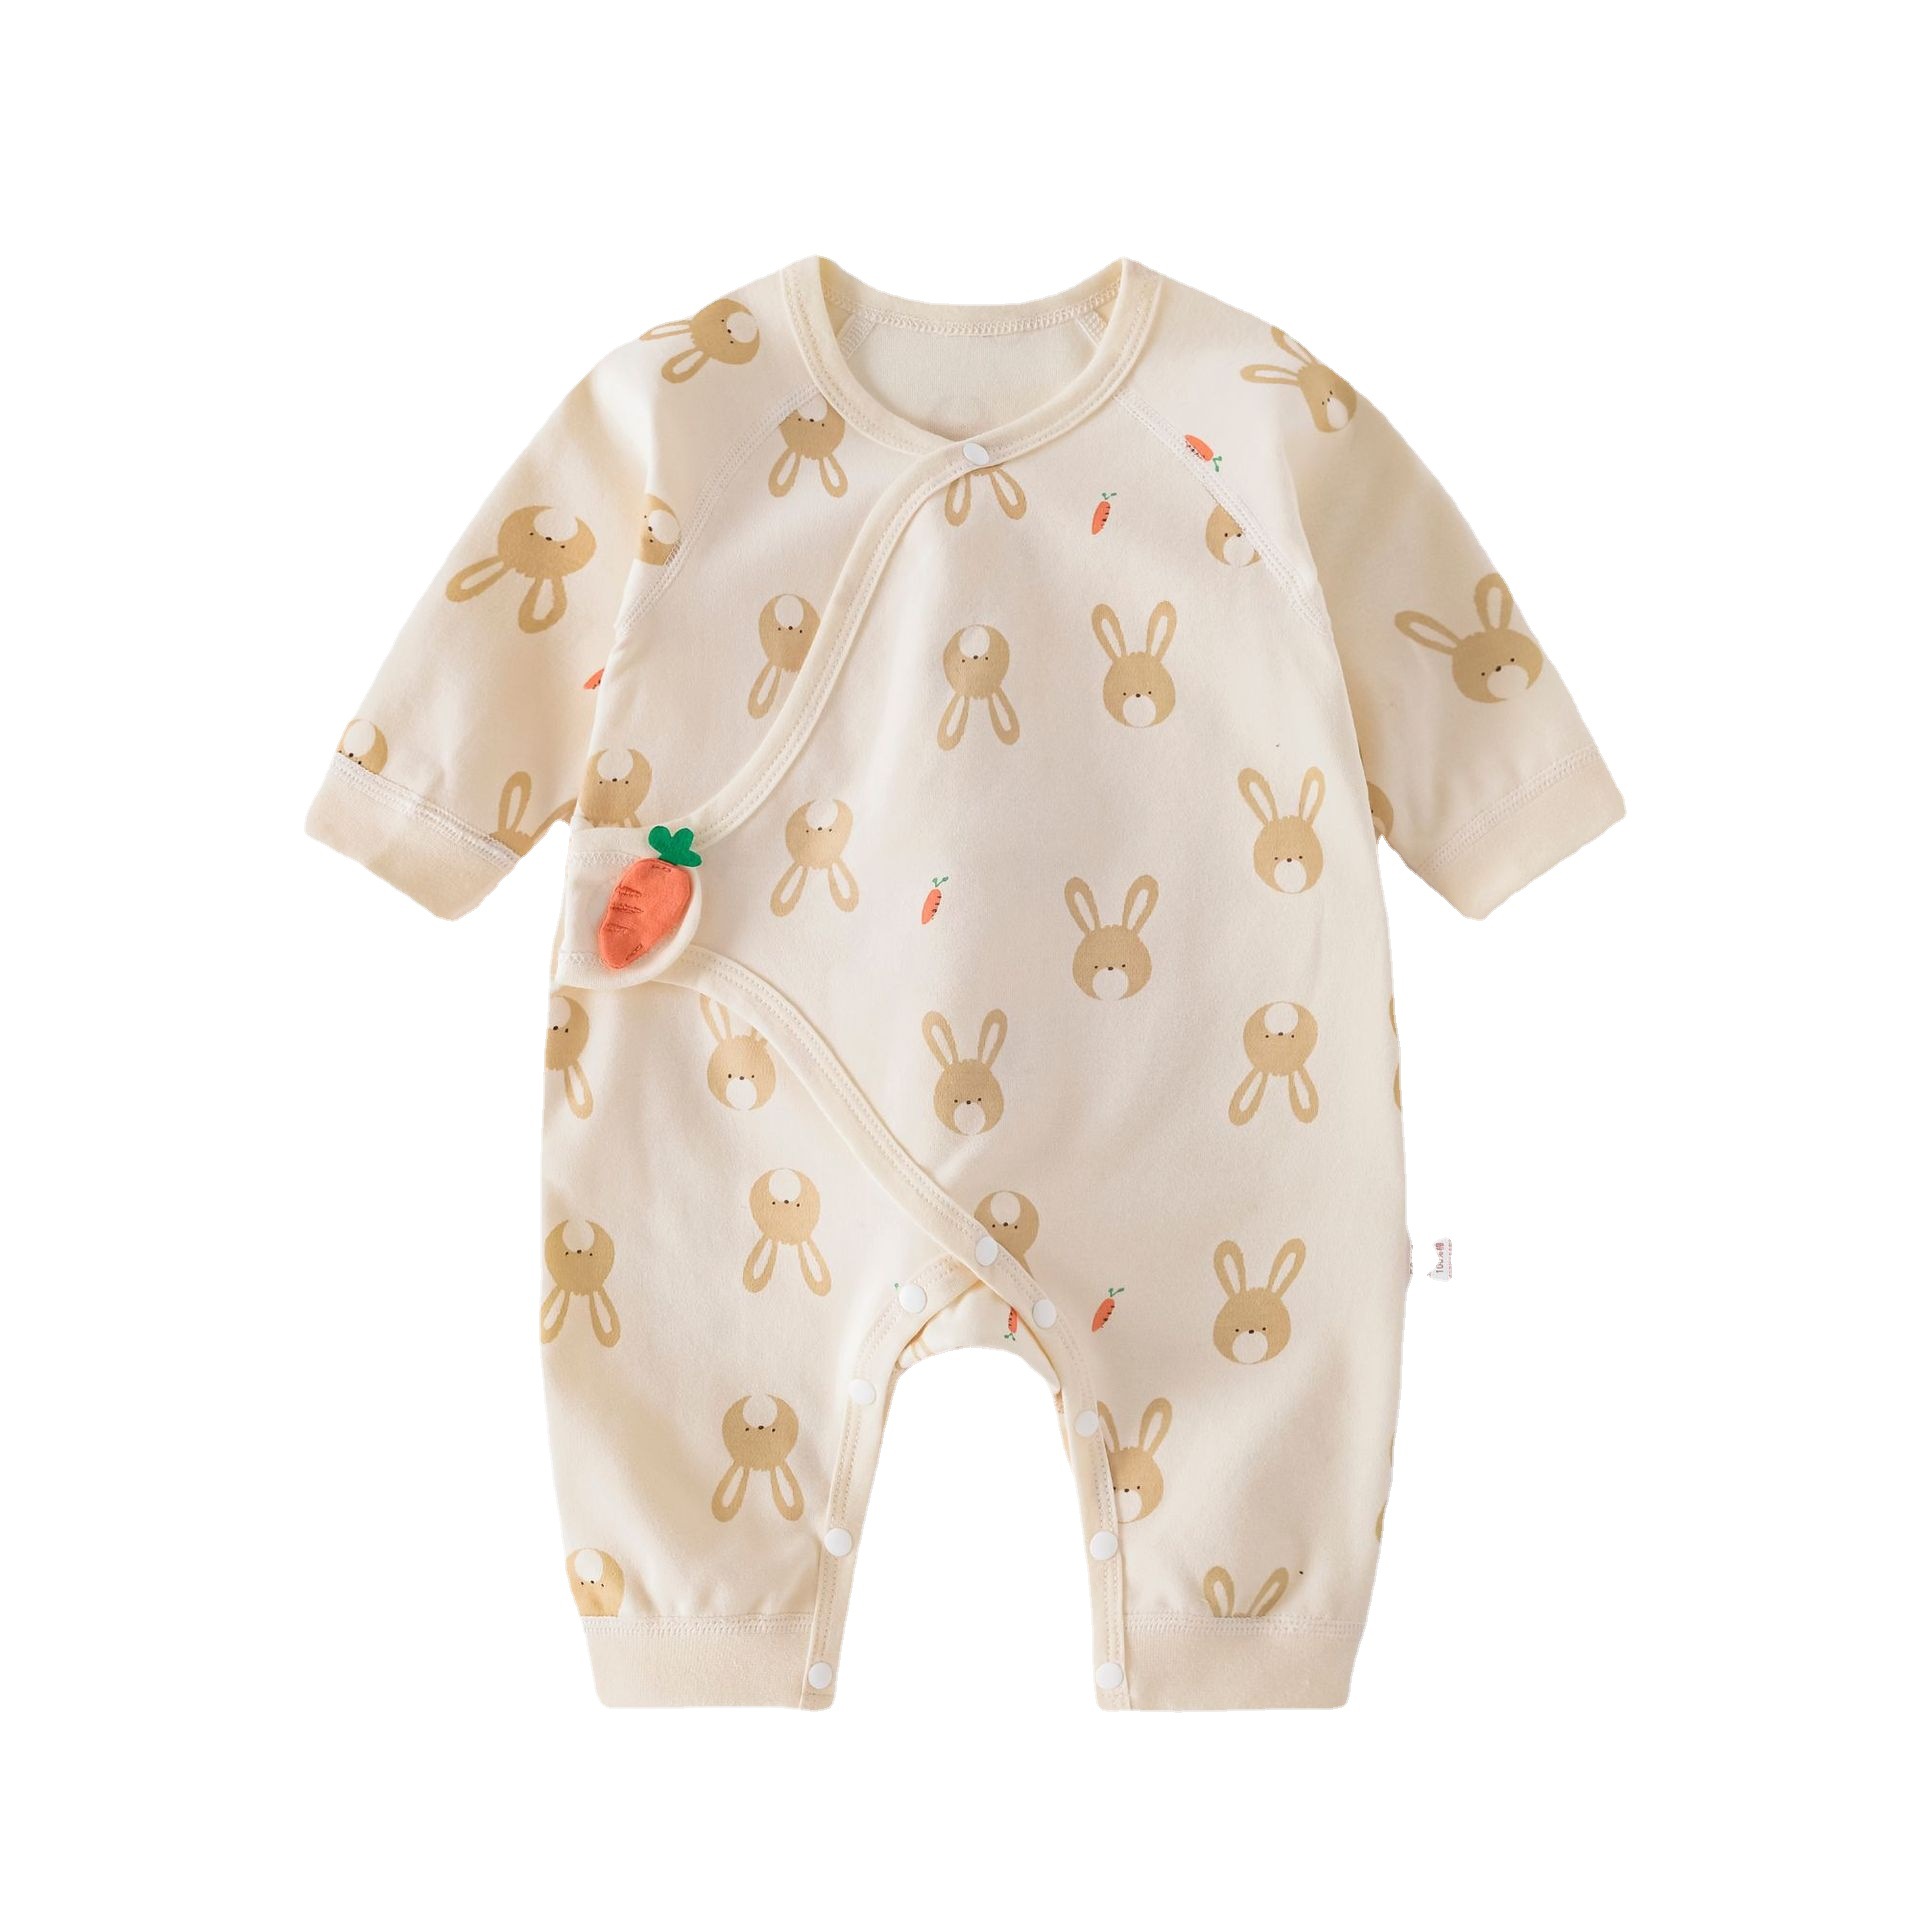 Baby Clothes Newborn Jumpsuit Baby Anyang Children's Clothing Romper Female Spring and Autumn Pure Cotton Class a Romper Air Conditioning Clothes